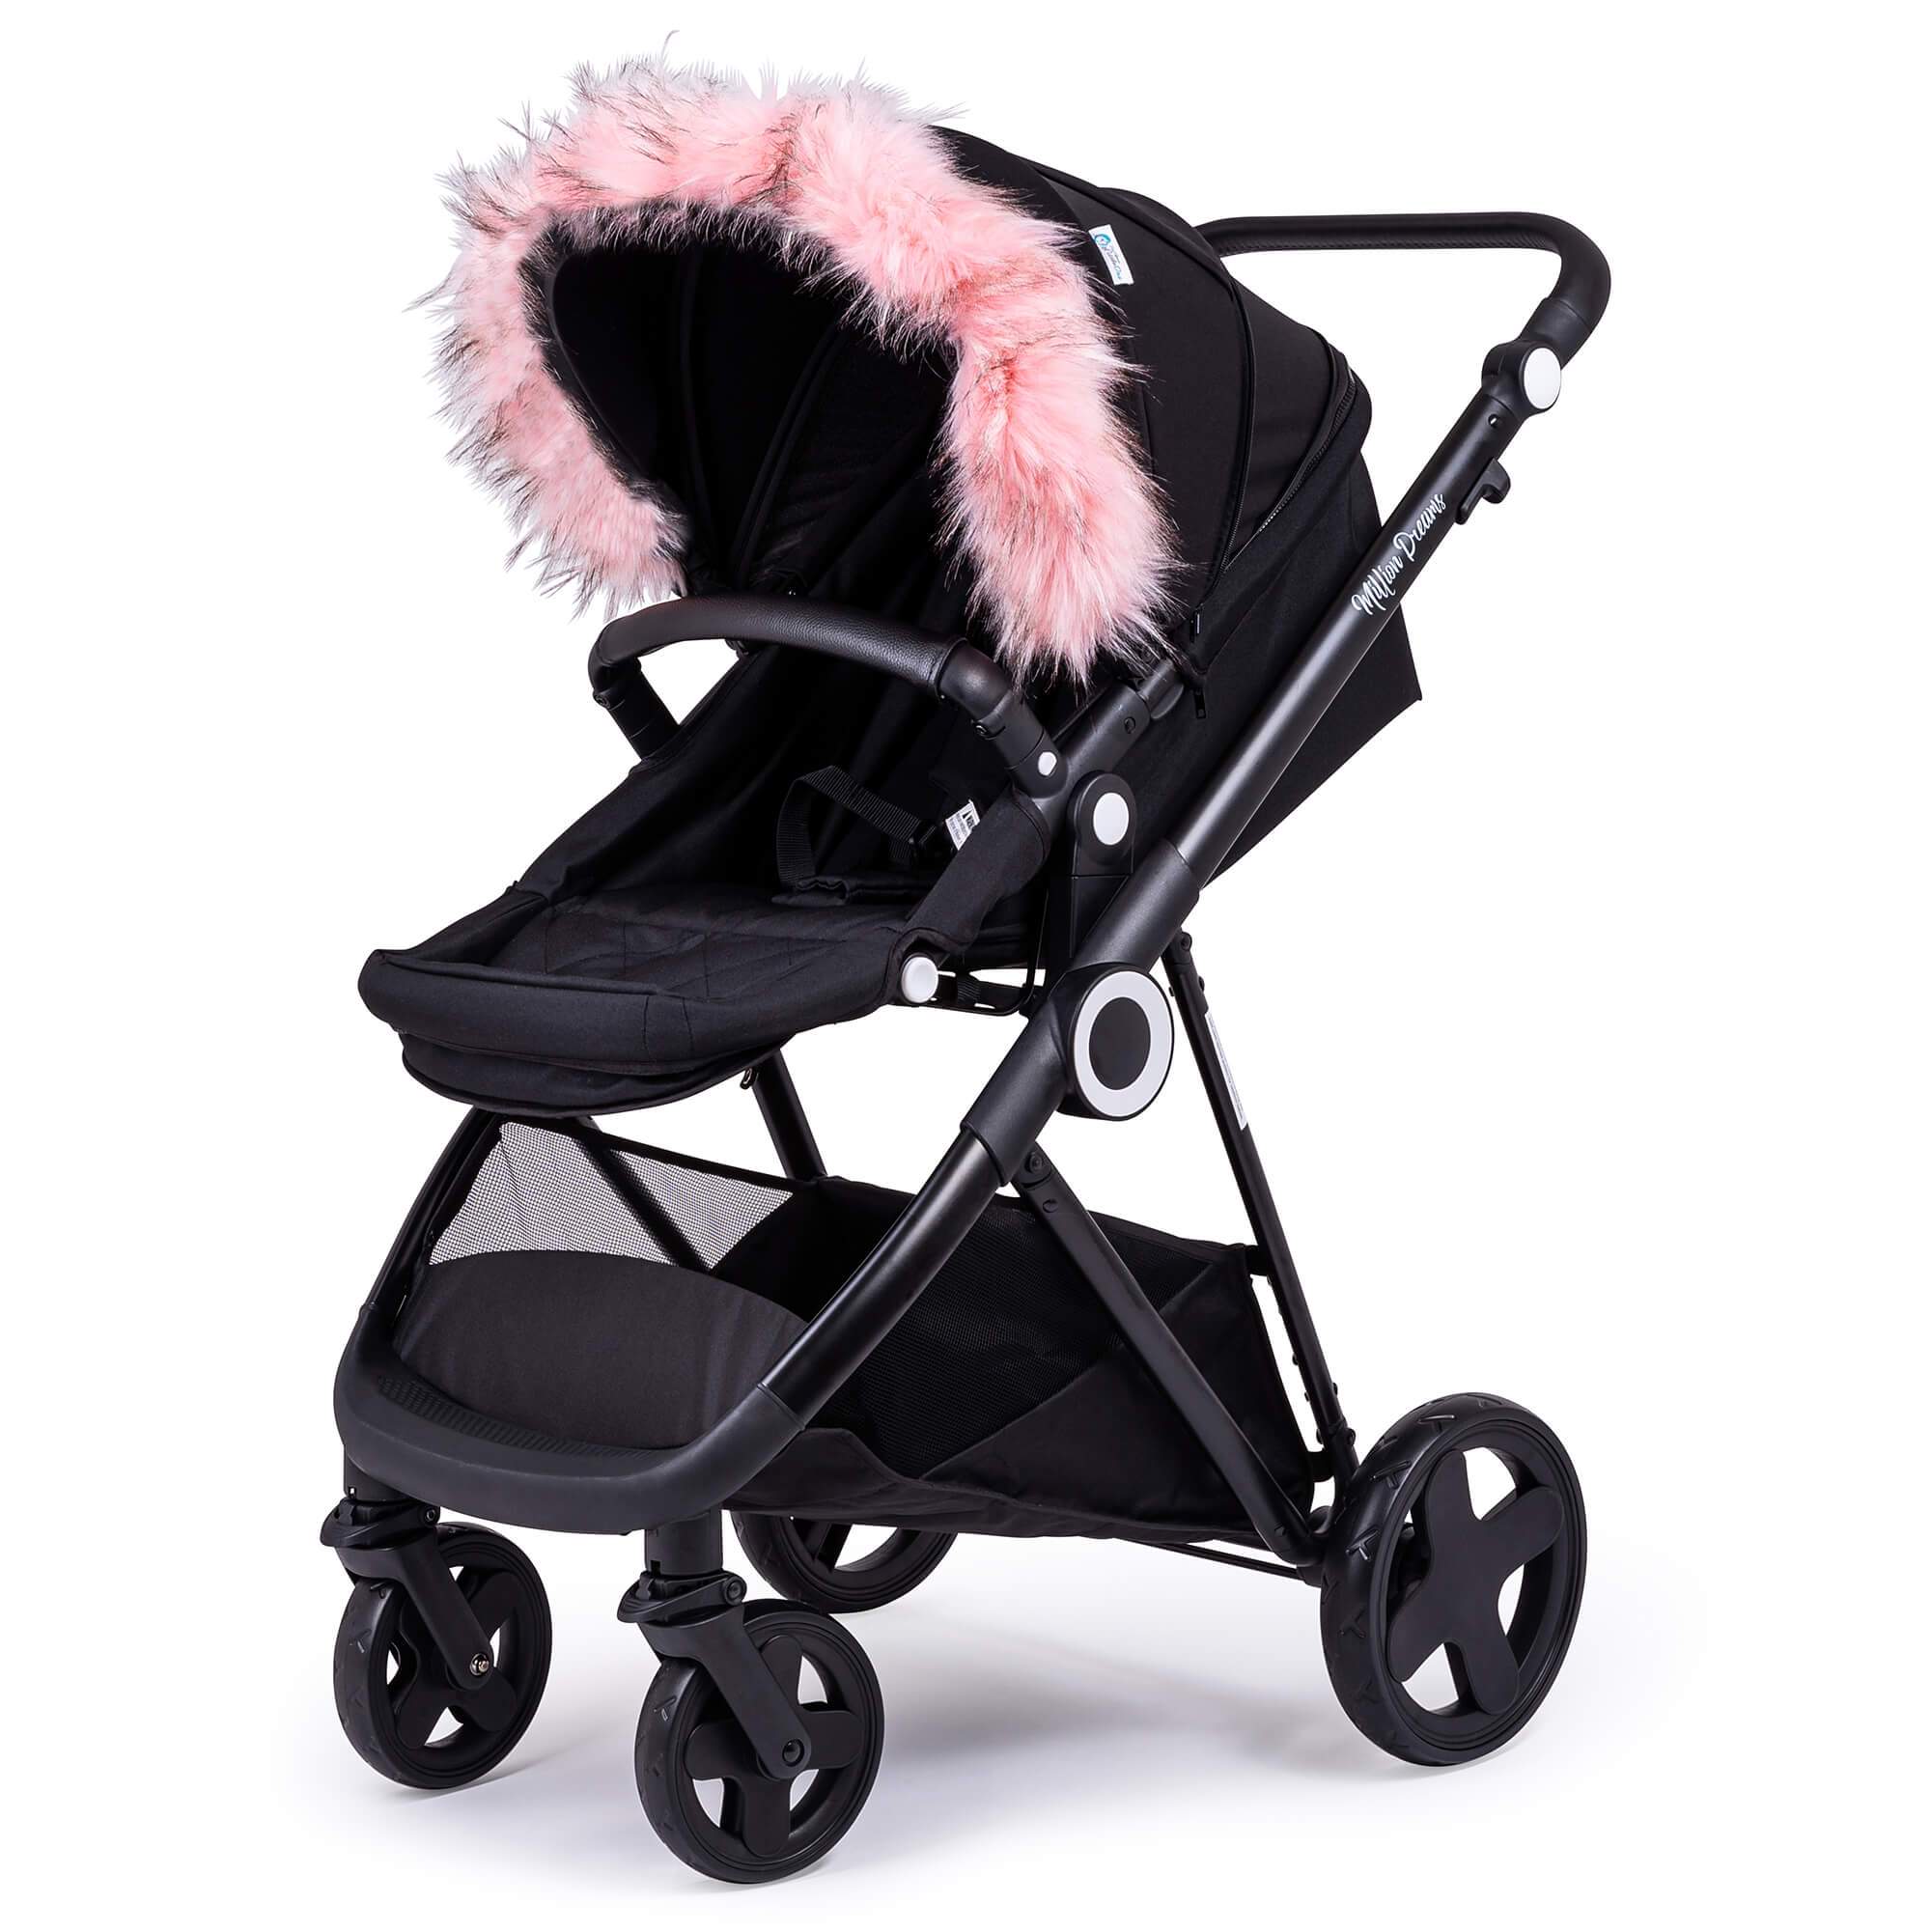 Pram Fur Hood Trim Attachment for Pushchair Compatible with Hybrid - Light Pink / Fits All Models | For Your Little One